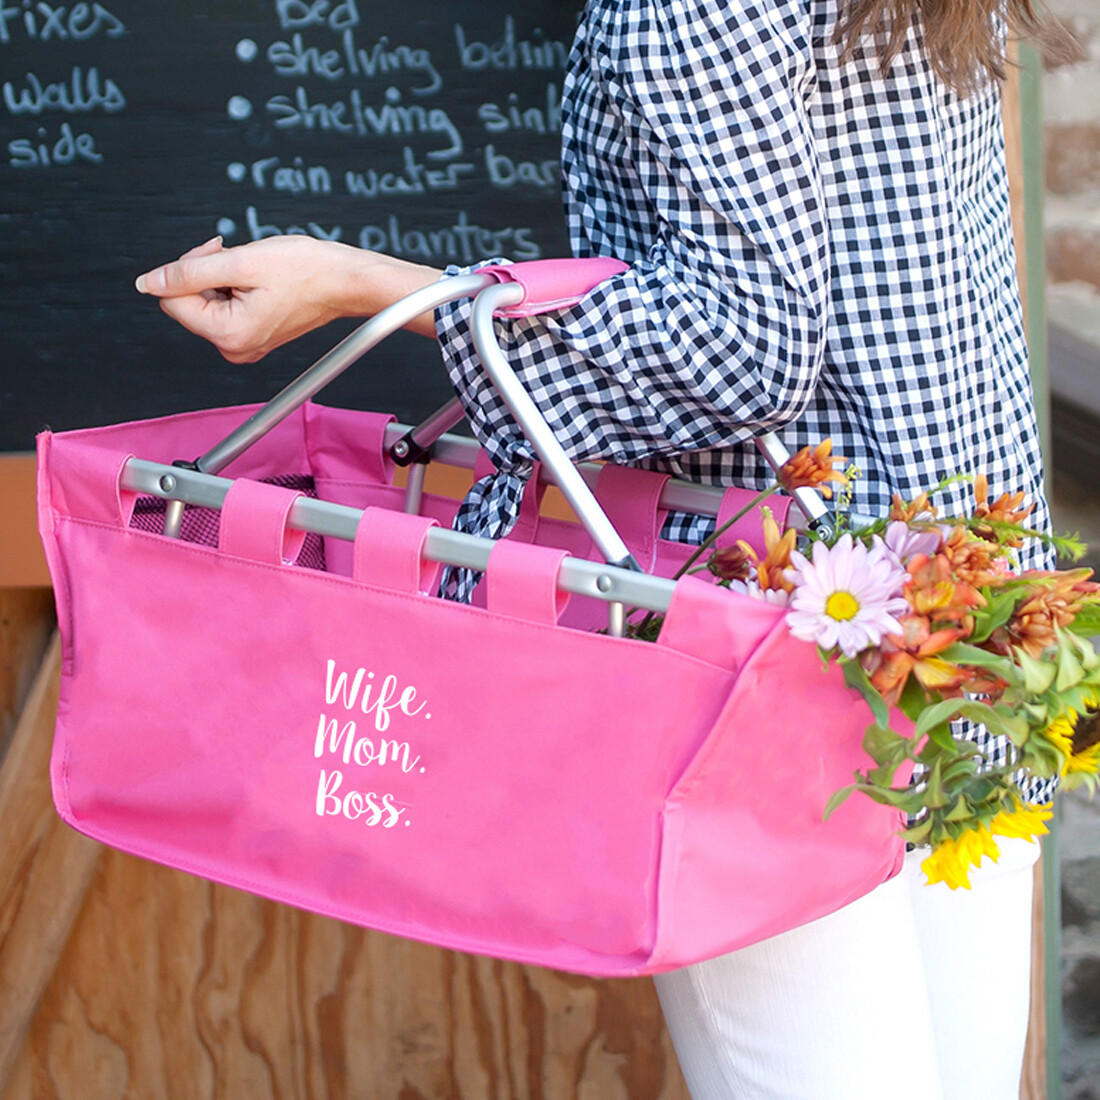 Wife.Mom.Boss Hot Pink Market Tote